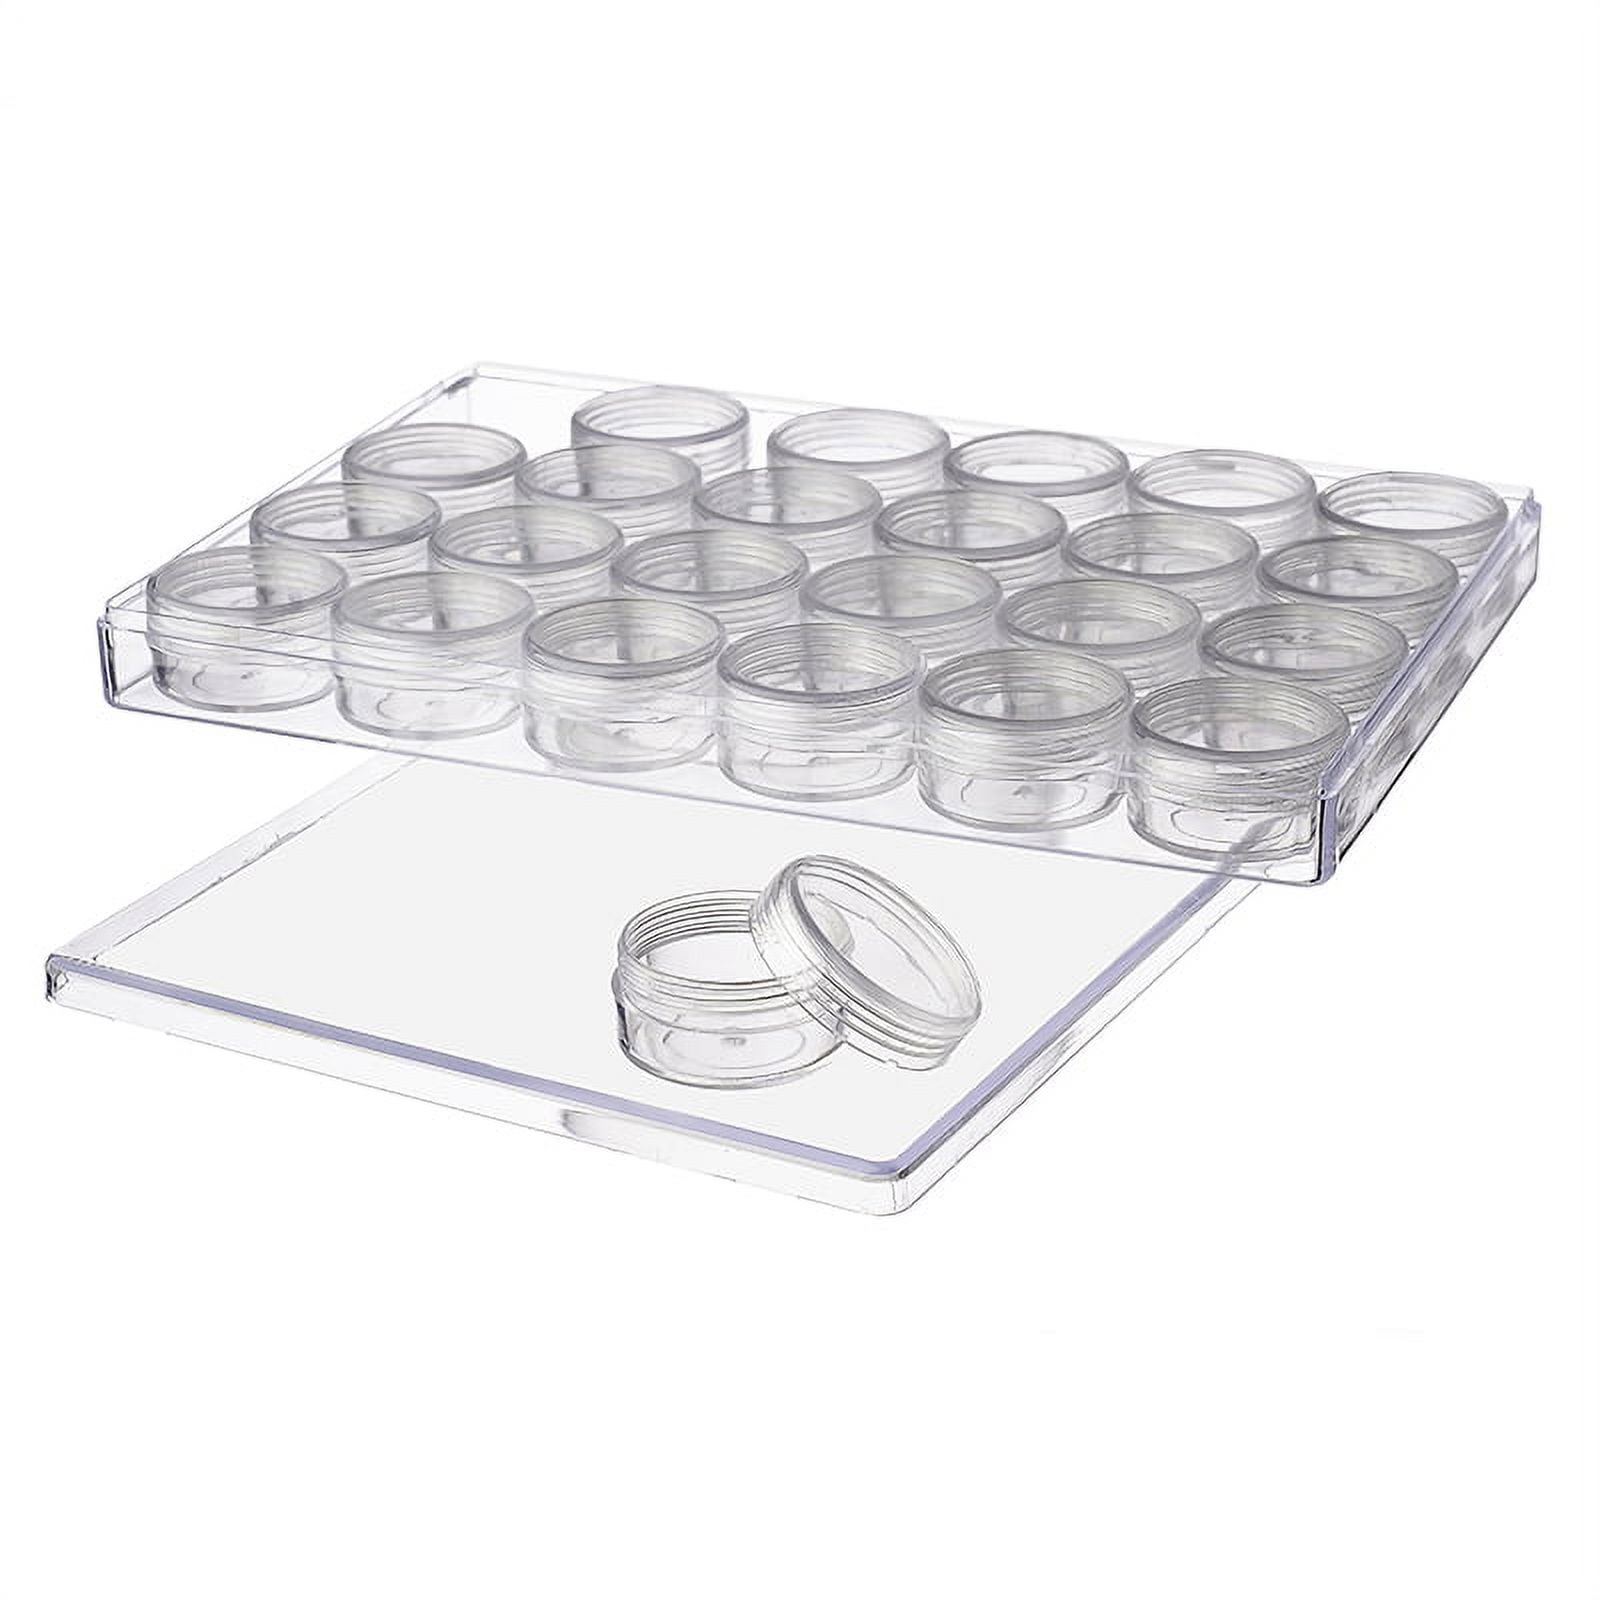  Darice Clear S Organizer Storage Case, 10.25” x 6.75” x 1.625”  – Snap-Tight Bead Holder with 17 Compartments, Also for Sequins, Nails,  Jewelry Making Supplies : Arts, Crafts & Sewing